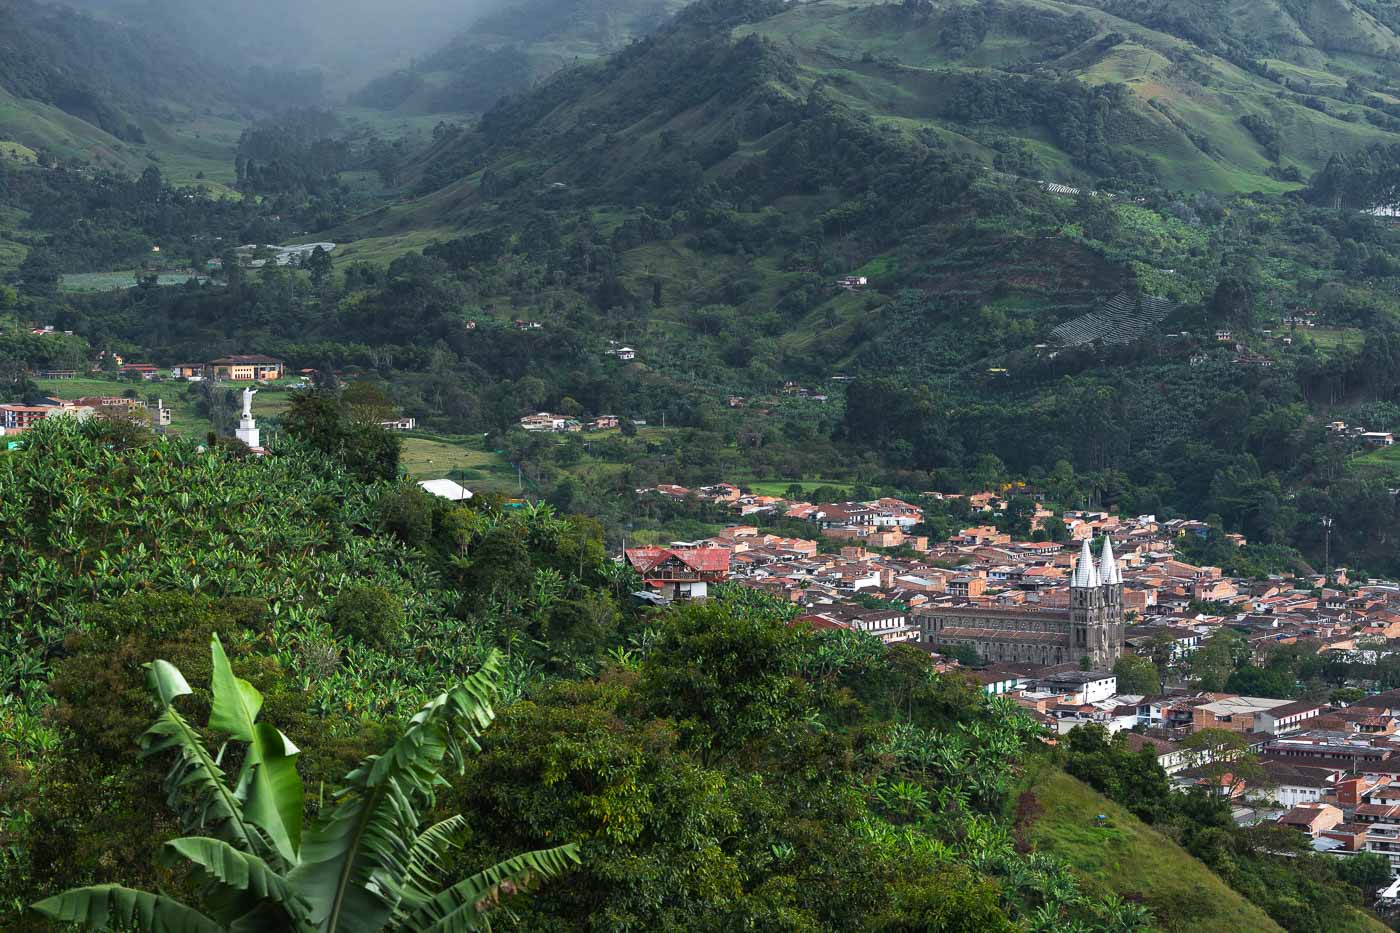 The view over Jardin town and the basilica in a valley in the Andes from Cafe Jardin.